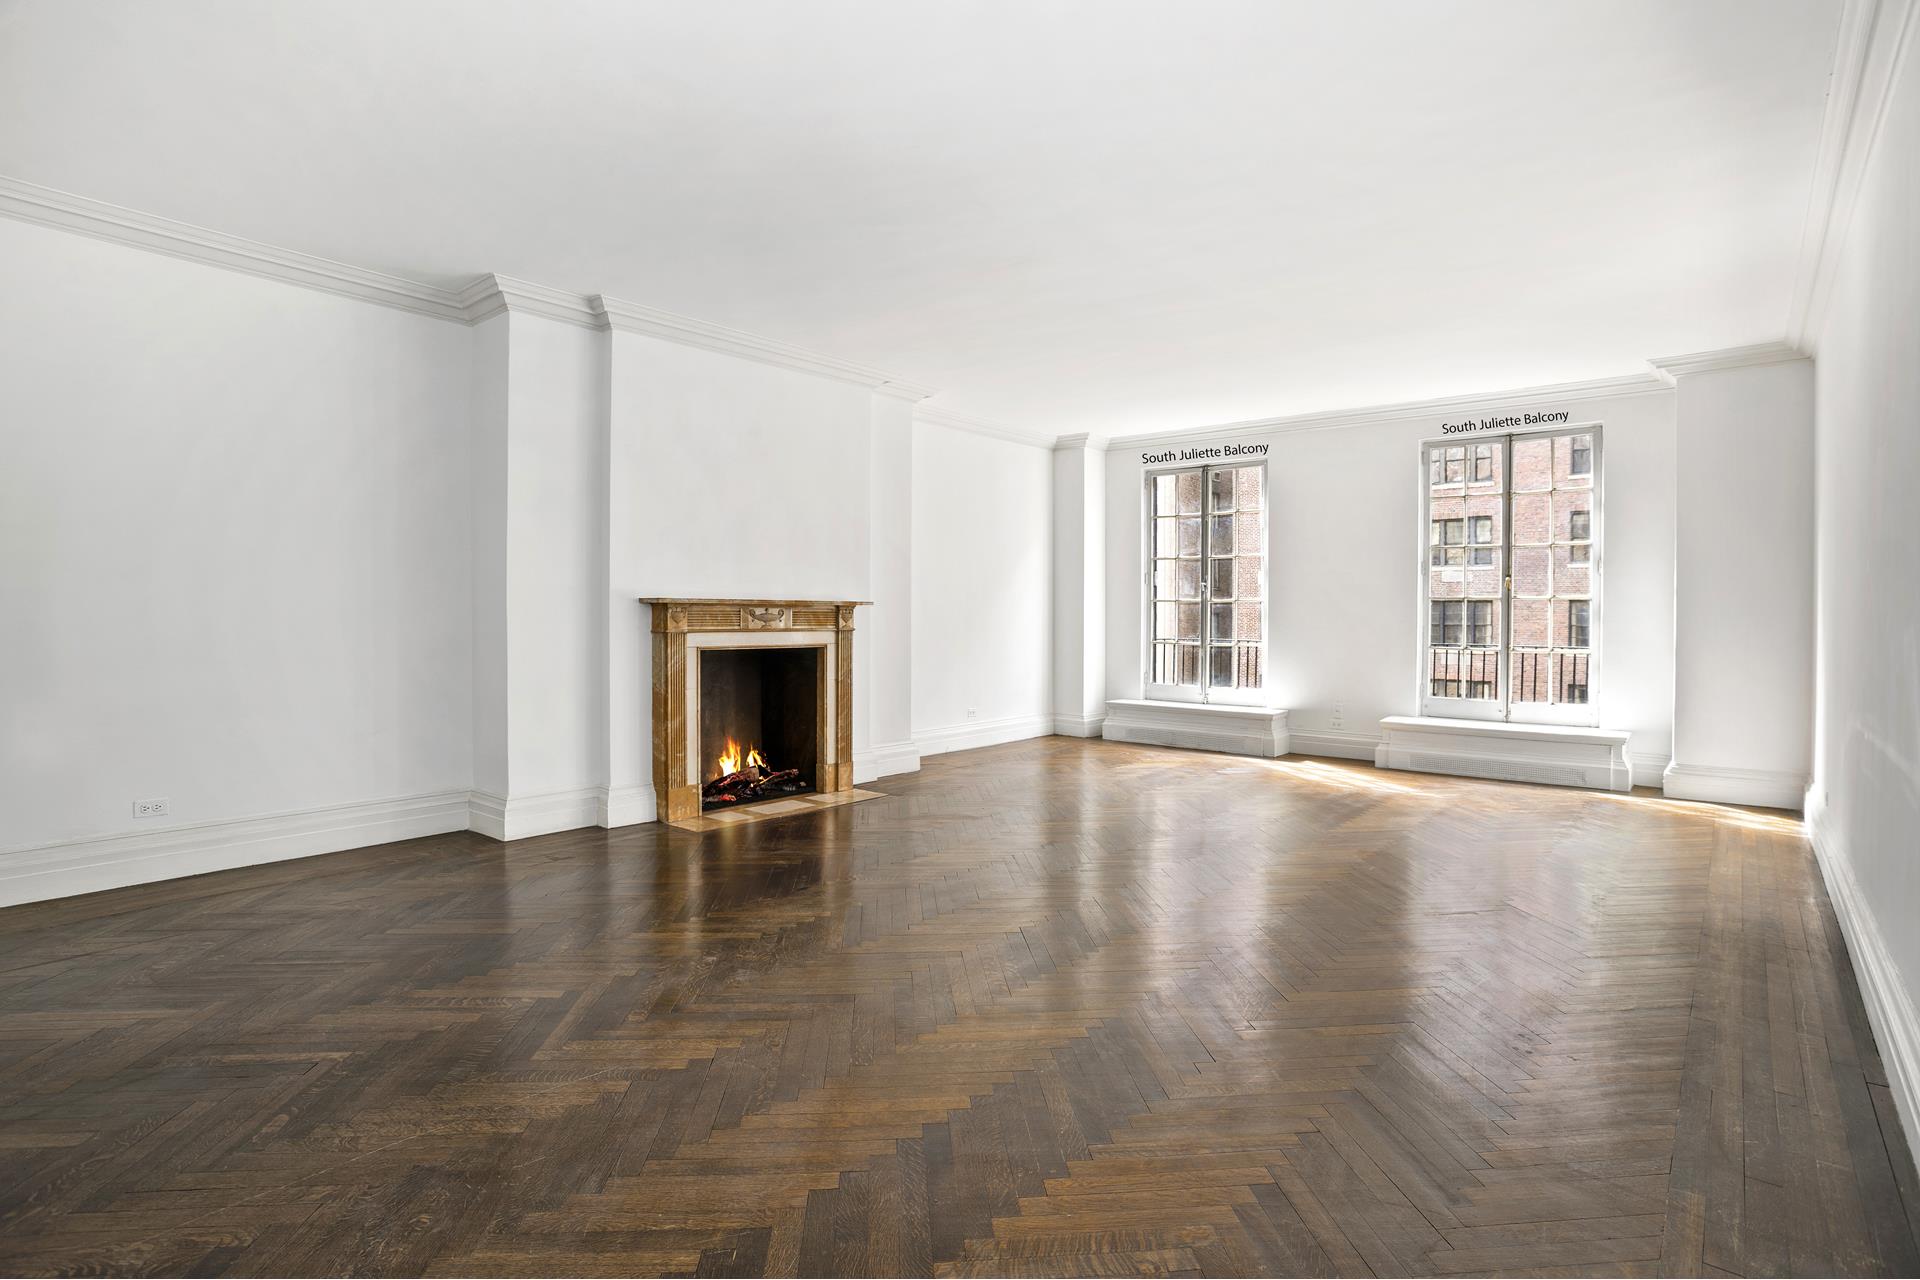 447 East 57th Street 9th, Sutton, Midtown East, NYC - 4 Bedrooms  
4 Bathrooms  
11 Rooms - 